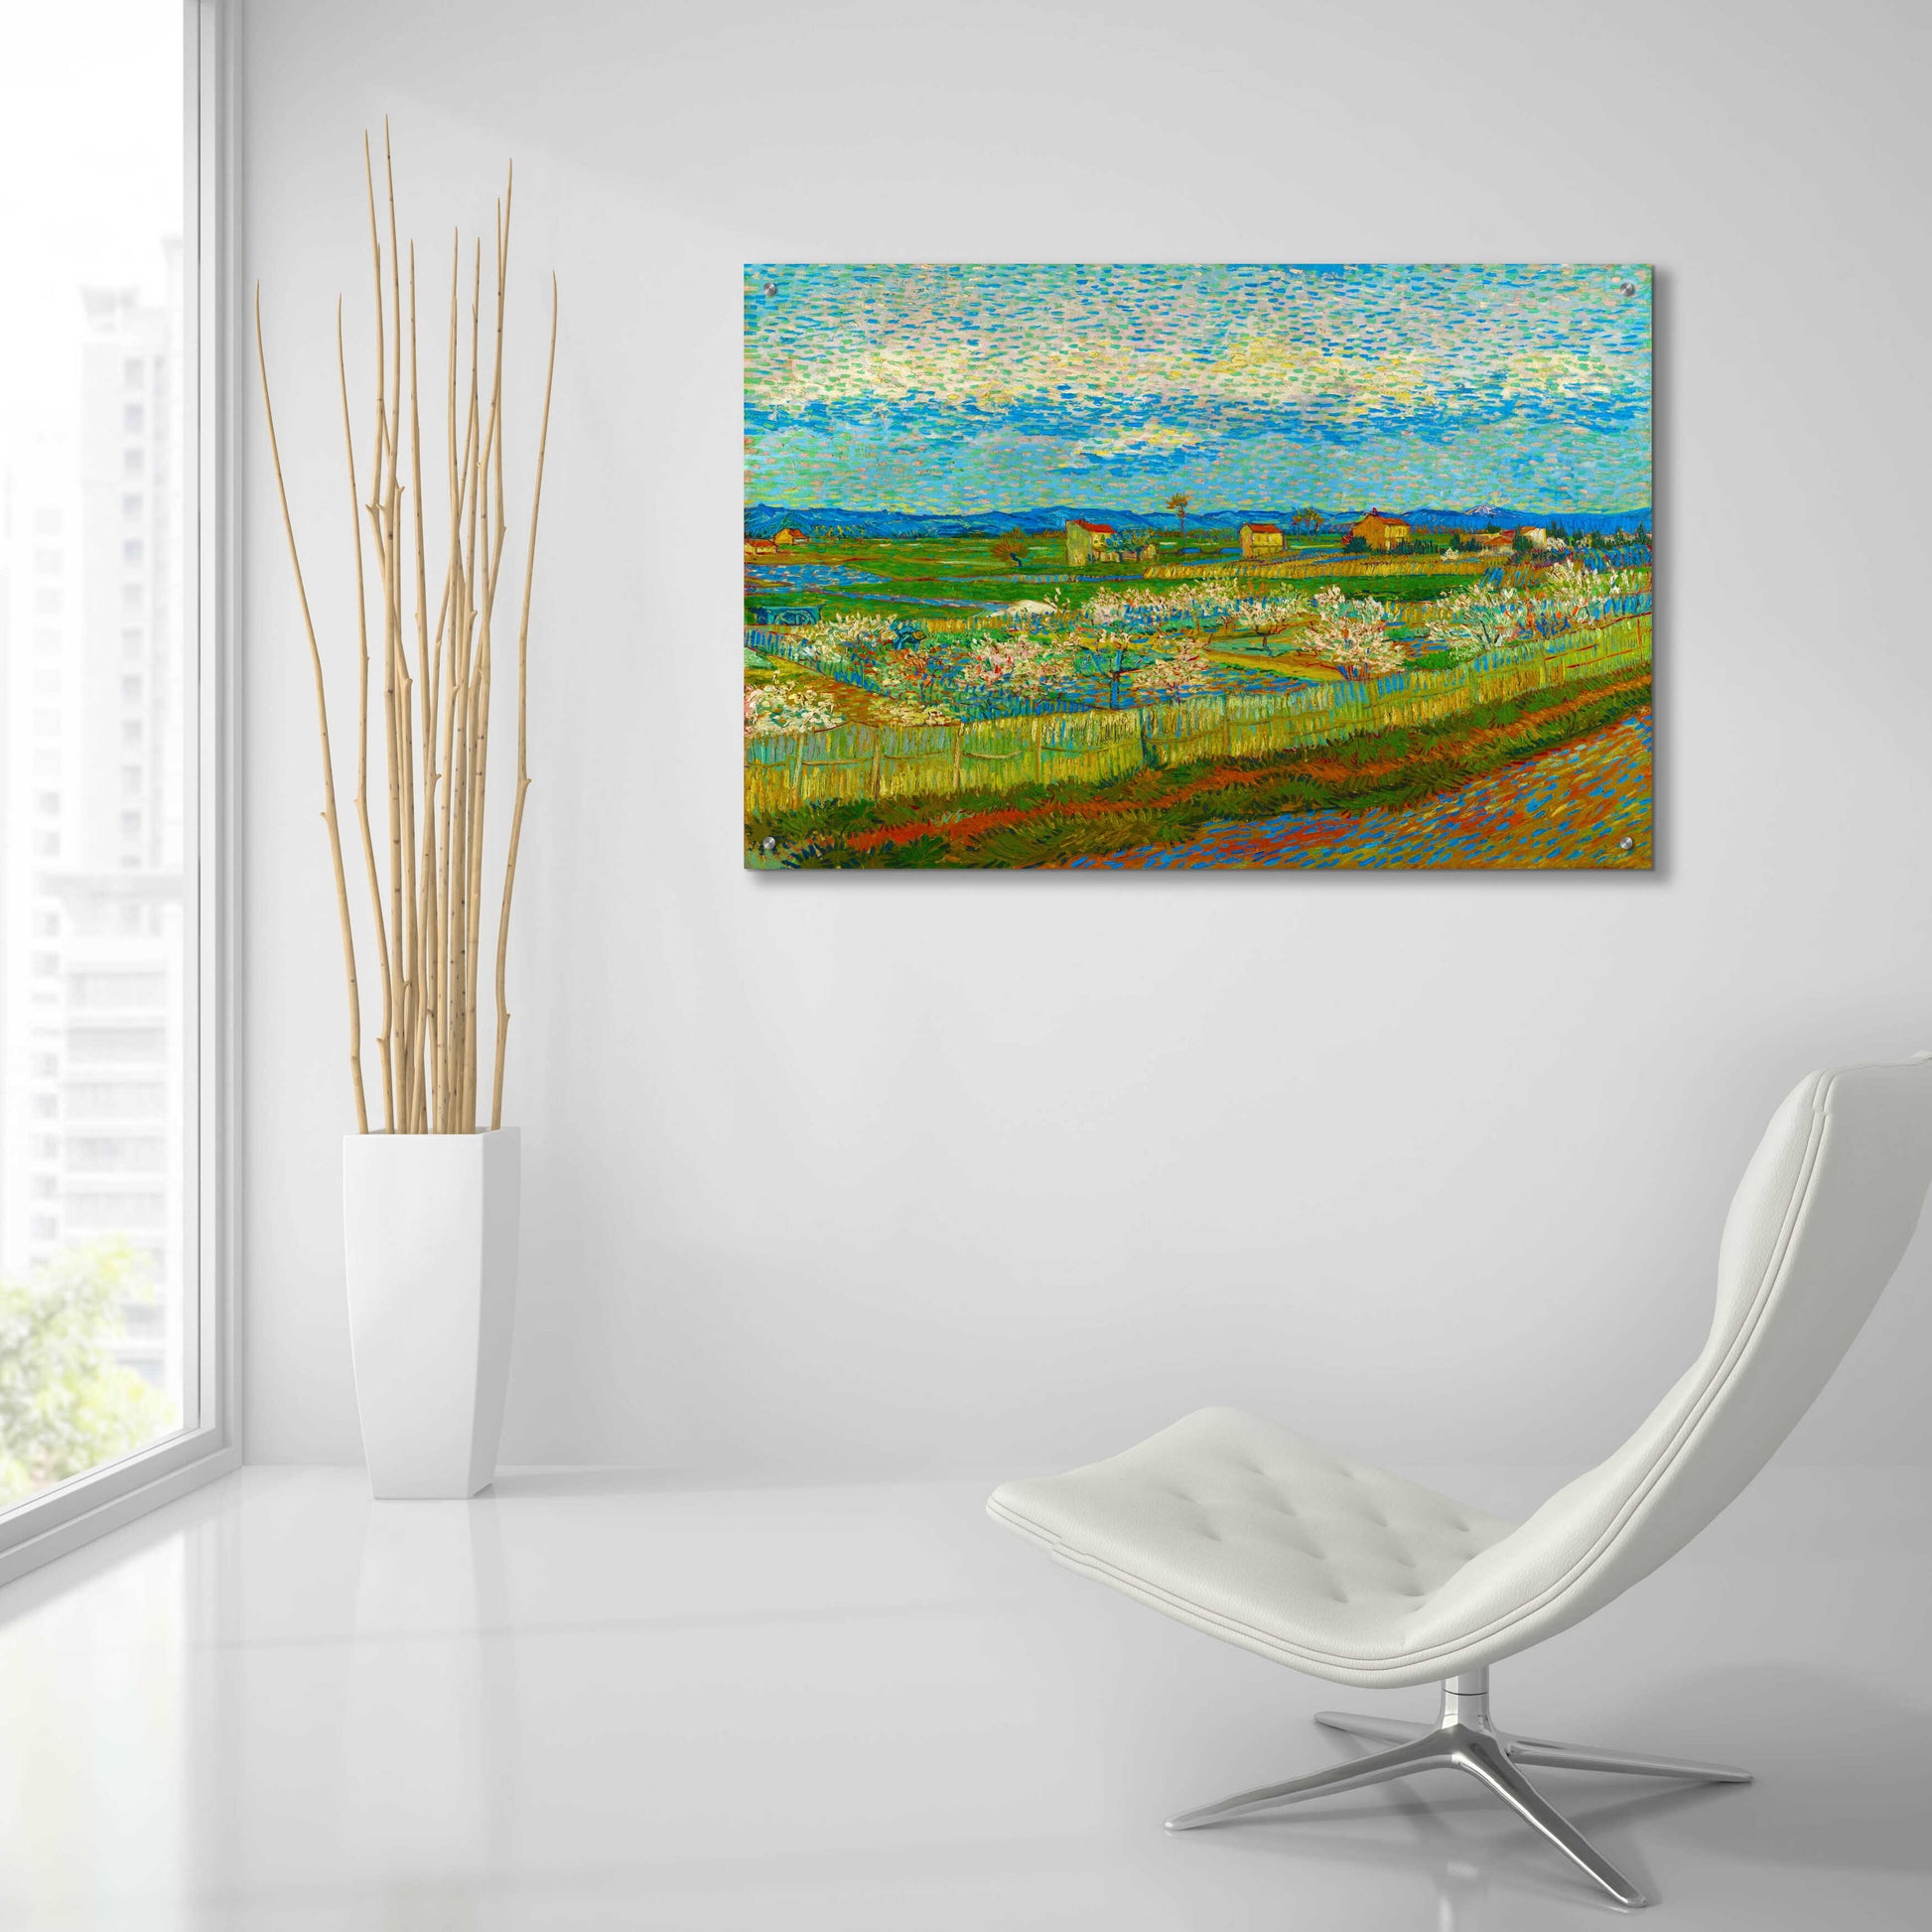 Epic Art 'Peach Trees In Blossom' by Vincent Van Gogh, Acrylic Glass Wall Art,36x24